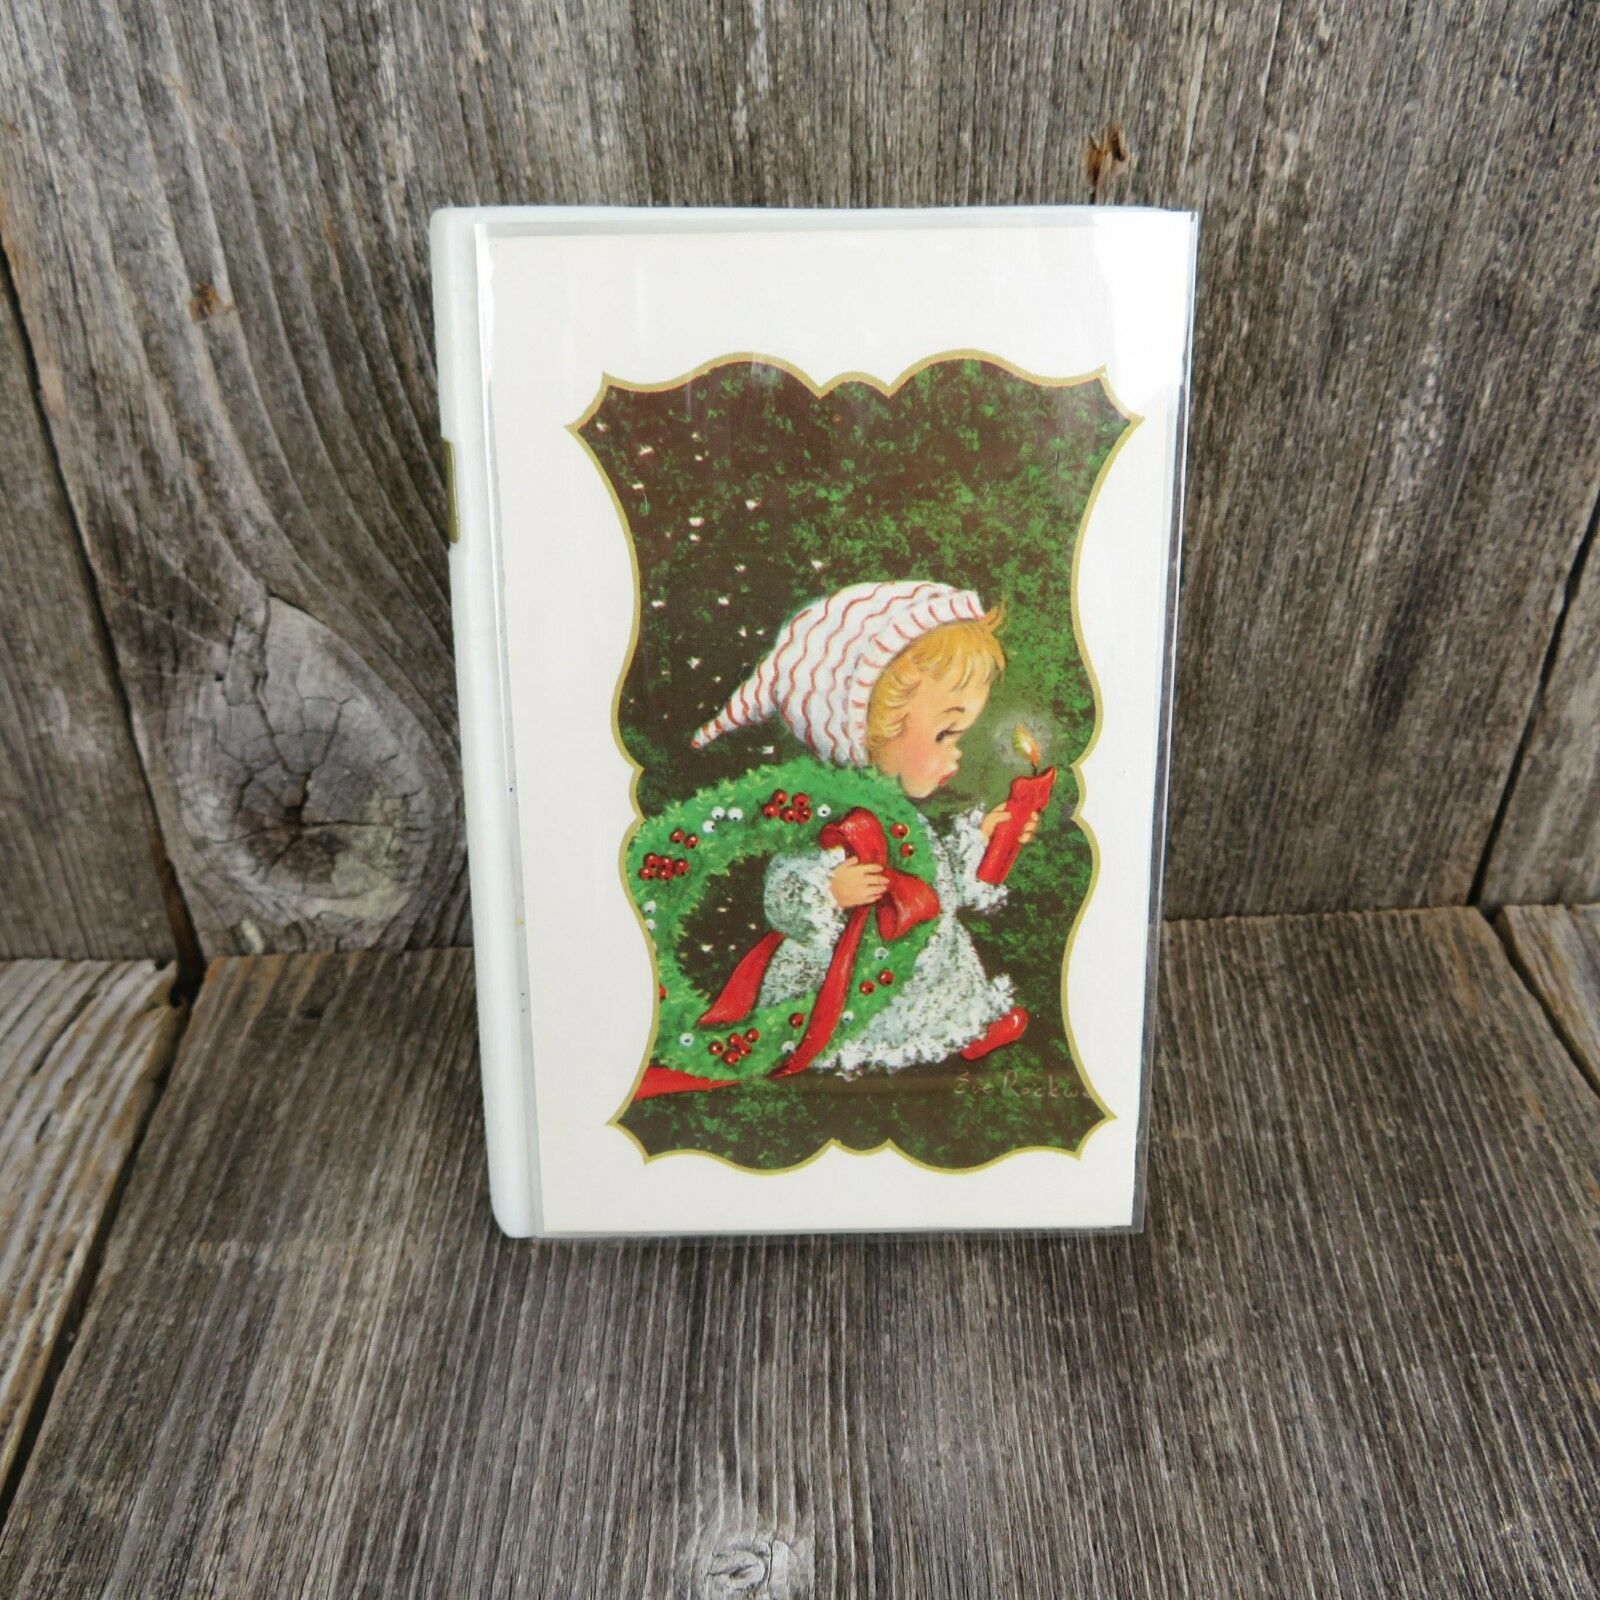 Vintage Christmas Card Book Music Box Child Santa Claus Is Coming To Town - At Grandma's Table